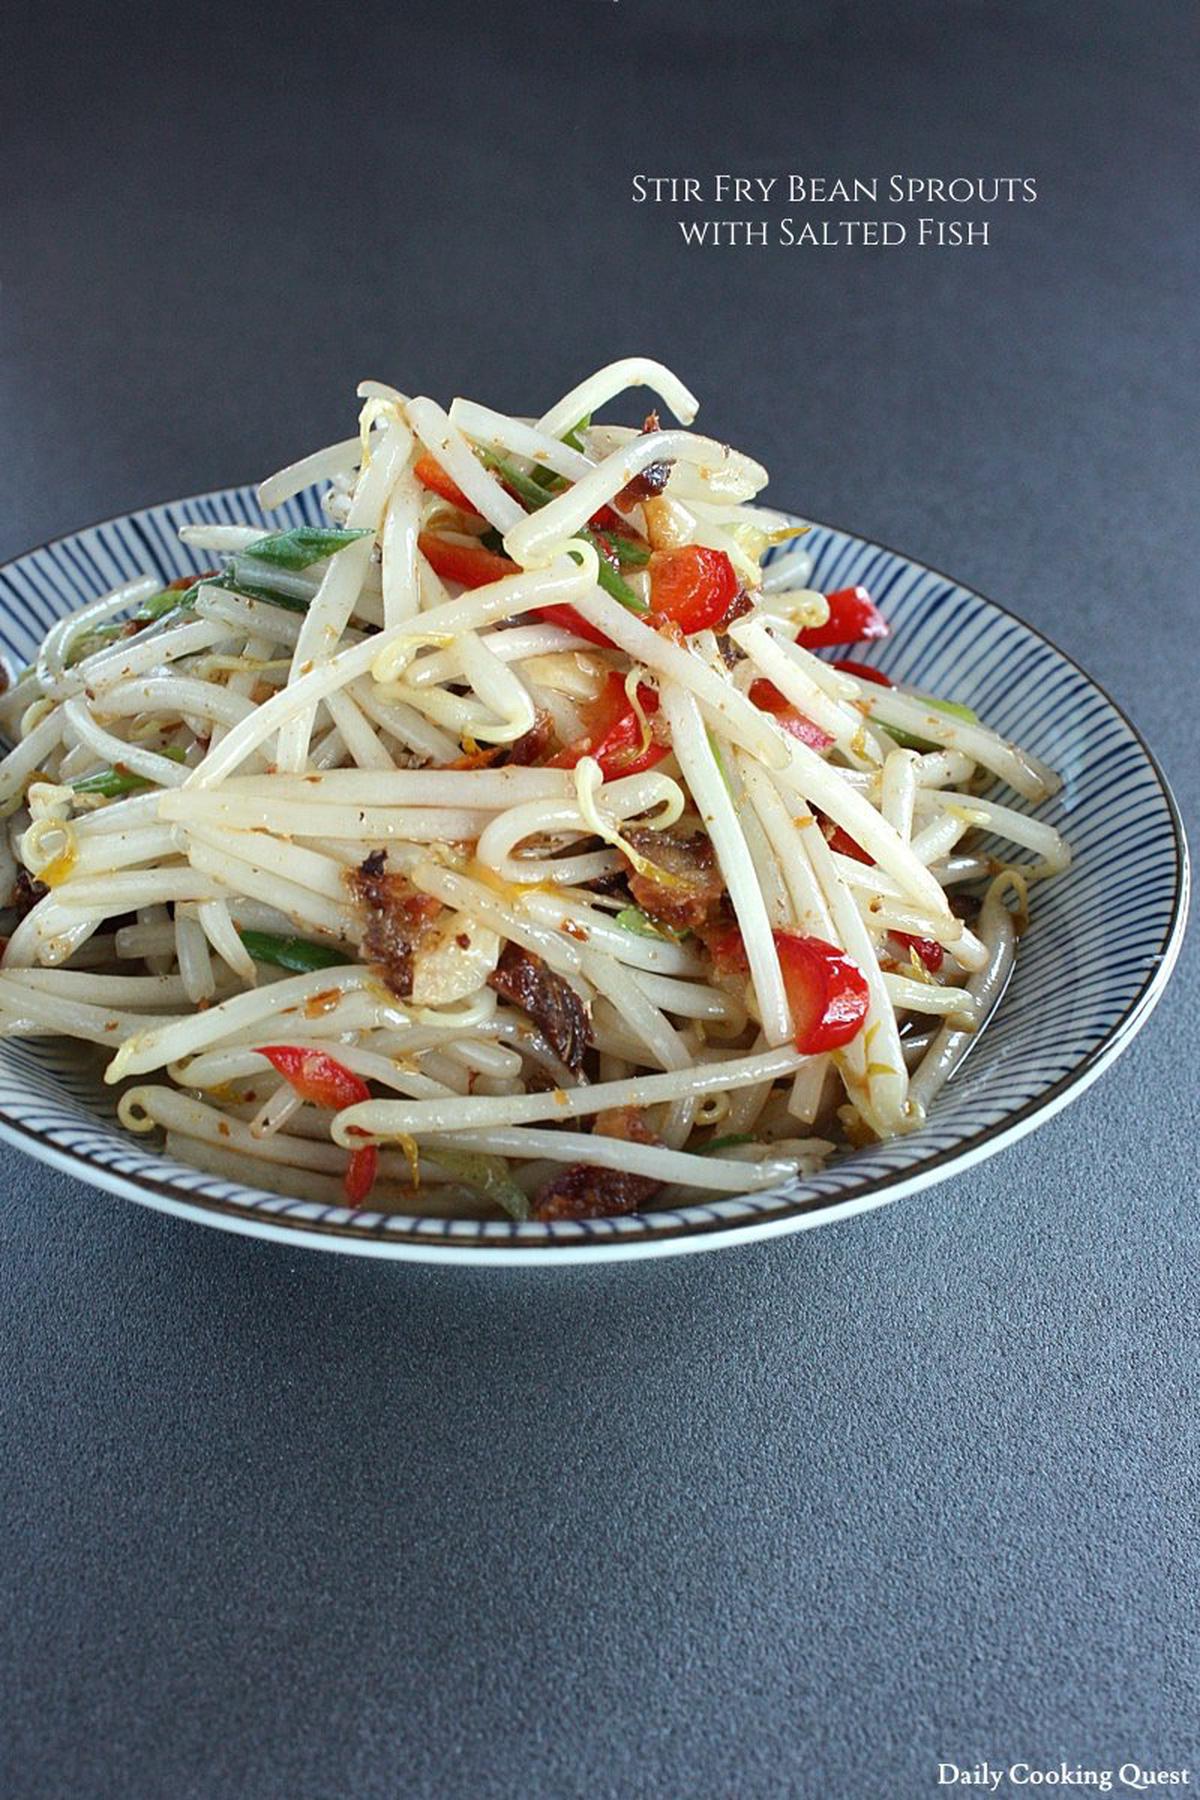 Stir Fry Bean Sprouts with Salted Fish